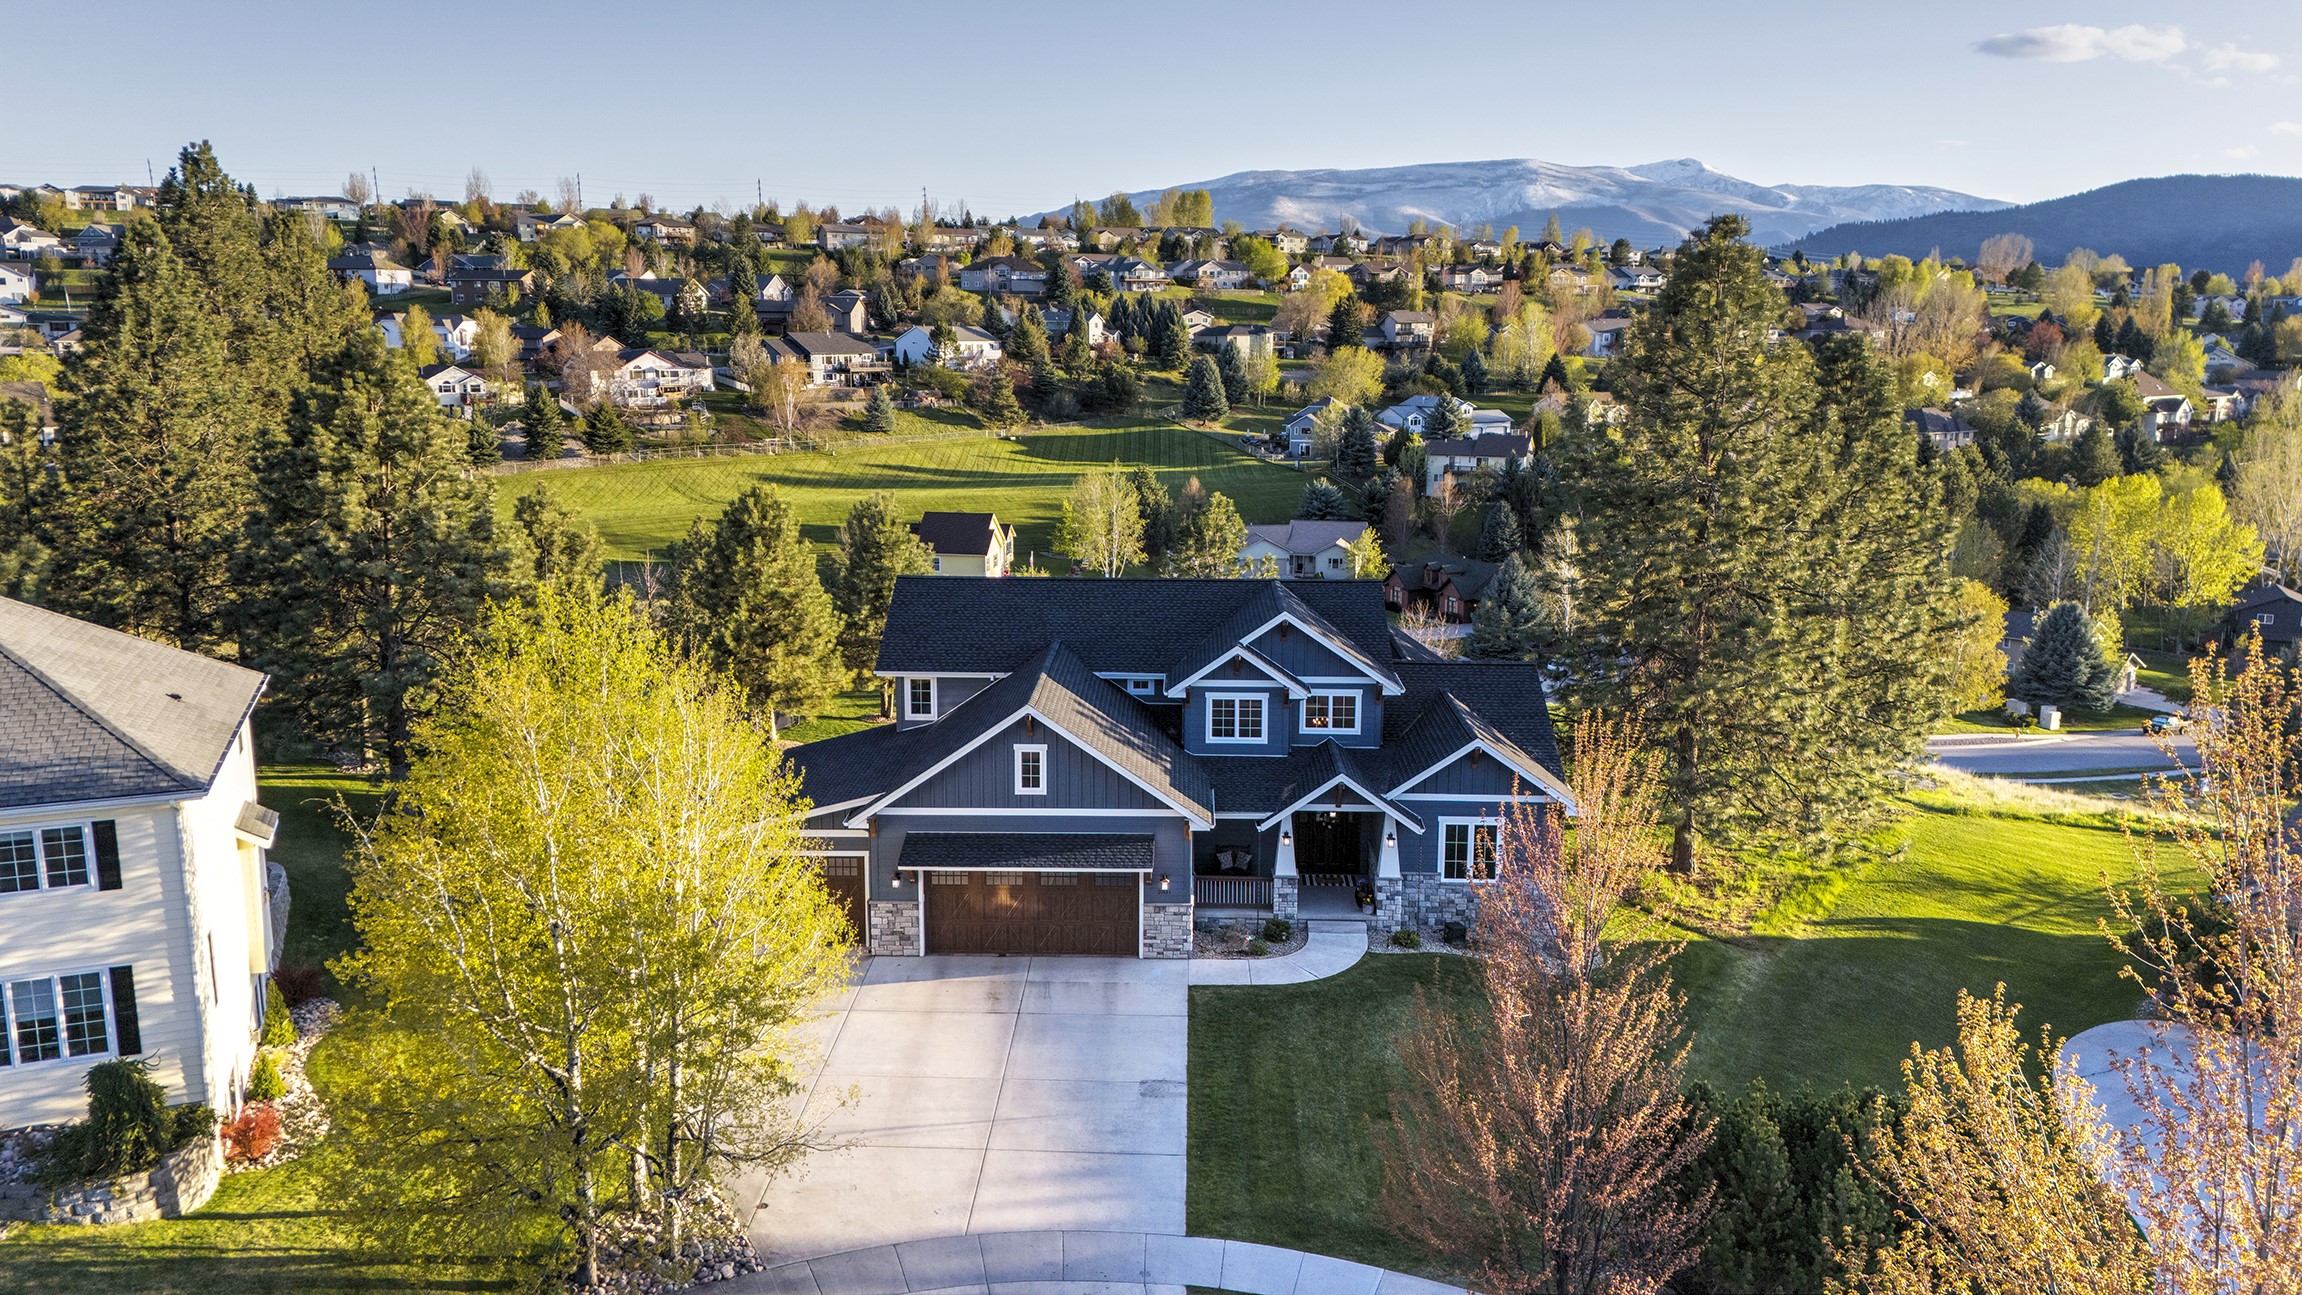 Nestled in Upper Miller Creek, this residence spans over 5,600+ square feet on a generous 0.89 acre lot situated at the end of a cul-de-sac. Crafted by Hoyt Homes in 2017, this custom home opens to breathtaking views of the mountains and Missoula Valley. The home features an inviting open layout encompassing the dining room, living space, and kitchen, with custom shelving around a rock fireplace, and custom cabinets in the kitchen. Natural light floods into the living room that is accentuated by substantial wooden beams and lofty ceilings, while the kitchen boasts a Bosch Appliance package inclusive of double ovens, built-in microwave, dishwasher, and gas stove top. The expansive island features a farmhouse sink and quartz countertops. With double sliders opening to the sizable trex deck, the dining room is a welcoming space. Adorned with hardwood flooring in key areas on the main level, the foyer boasts soaring vaulted ceilings. A sliding barn door opens to the pantry, complete with plumbing for an ice maker. The laundry room offers shelving, cabinets, and a sink, while the mudroom comprises of six custom lockers and ample storage, that is adjacent to a home office. The primary suite features a slider to the back deck, an on-suite walk-in closet, and a luxurious bathroom with double sinks, tile floors, a sizable soaker tub, tile shower, and a private water closet. A guest bedroom and bath are located near the entrance, with the bath showcasing tiled floors and a shower. Upstairs, a loft area and two spacious bedrooms with en-suite bathrooms, vanity areas, and generous closets await. The lower level hosts a generous family room with sliders to the lower patio, featuring a convenient drinking fountain nearby. The bar area boasts a sink, brick backsplash, granite counters, a mini fridge, and a microwave oven. The gym, equipped with an egress window and ample closet space, could double as a bedroom. Two additional bedrooms, a full bath, and a half bath are also included downstairs. The utility room houses a secondary set of washer and dryer hookups, the zoned boiler system, and the central air conditioning. The home benefits from radiant floor heating with ten distinct zones. Outside, the yard offers a shed, a fenced garden area, a rock fire pit, in-ground trampoline, and a triple-car garage. Bordering city open space, this property will forever have unobstructed views and privacy. 2831 Carla Jo Lane offers a serene and luxurious living experience in Missoula, MT. Contact Kris Hawkins, 406-396-6542, or your real estate professional today.